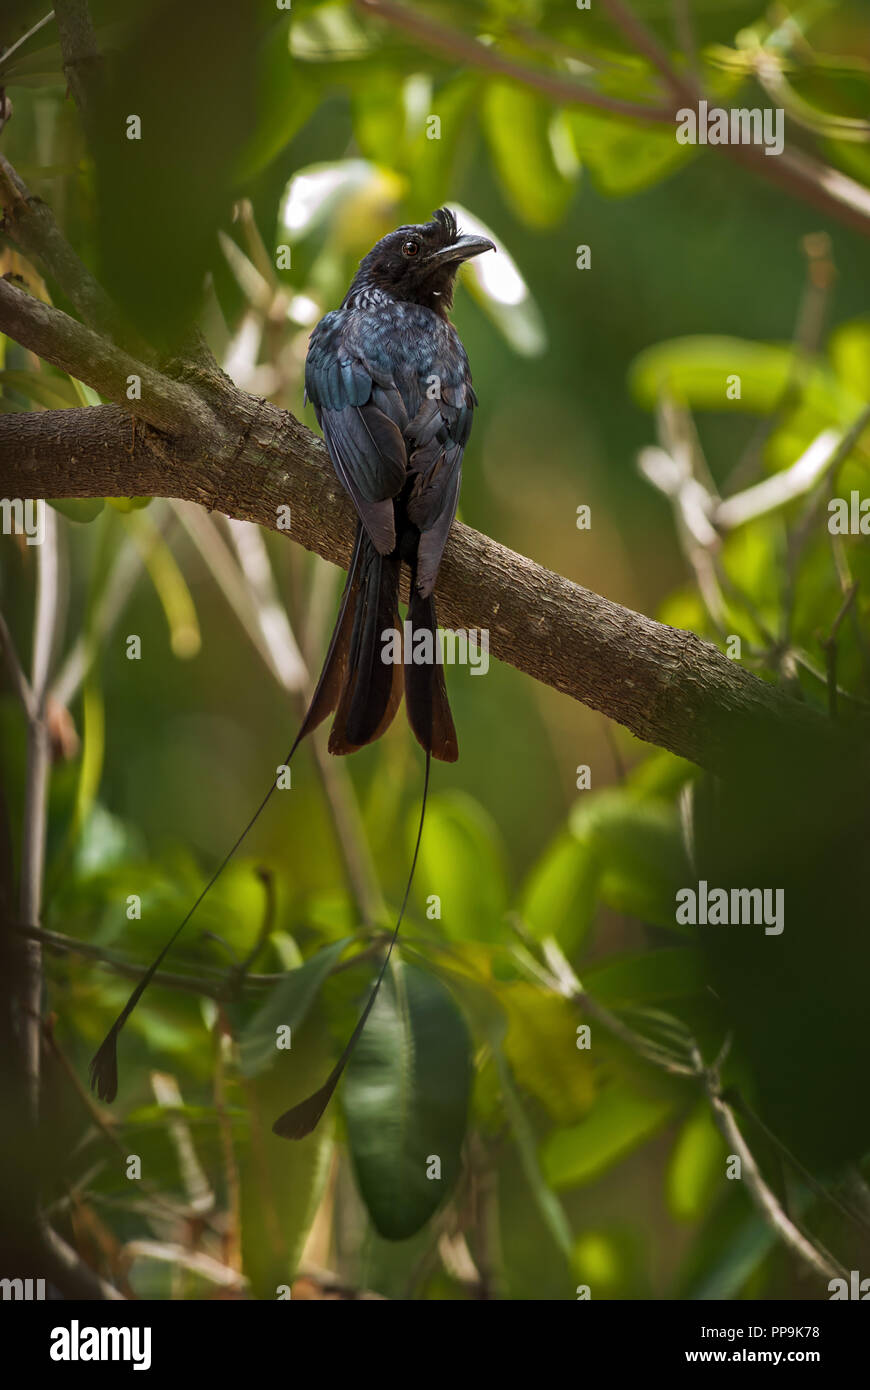 Greater Racket-tailed Drongo - Dicrurus paradiseus, iconic black perching bird from Southeast Asia forests and woodlands. Stock Photo